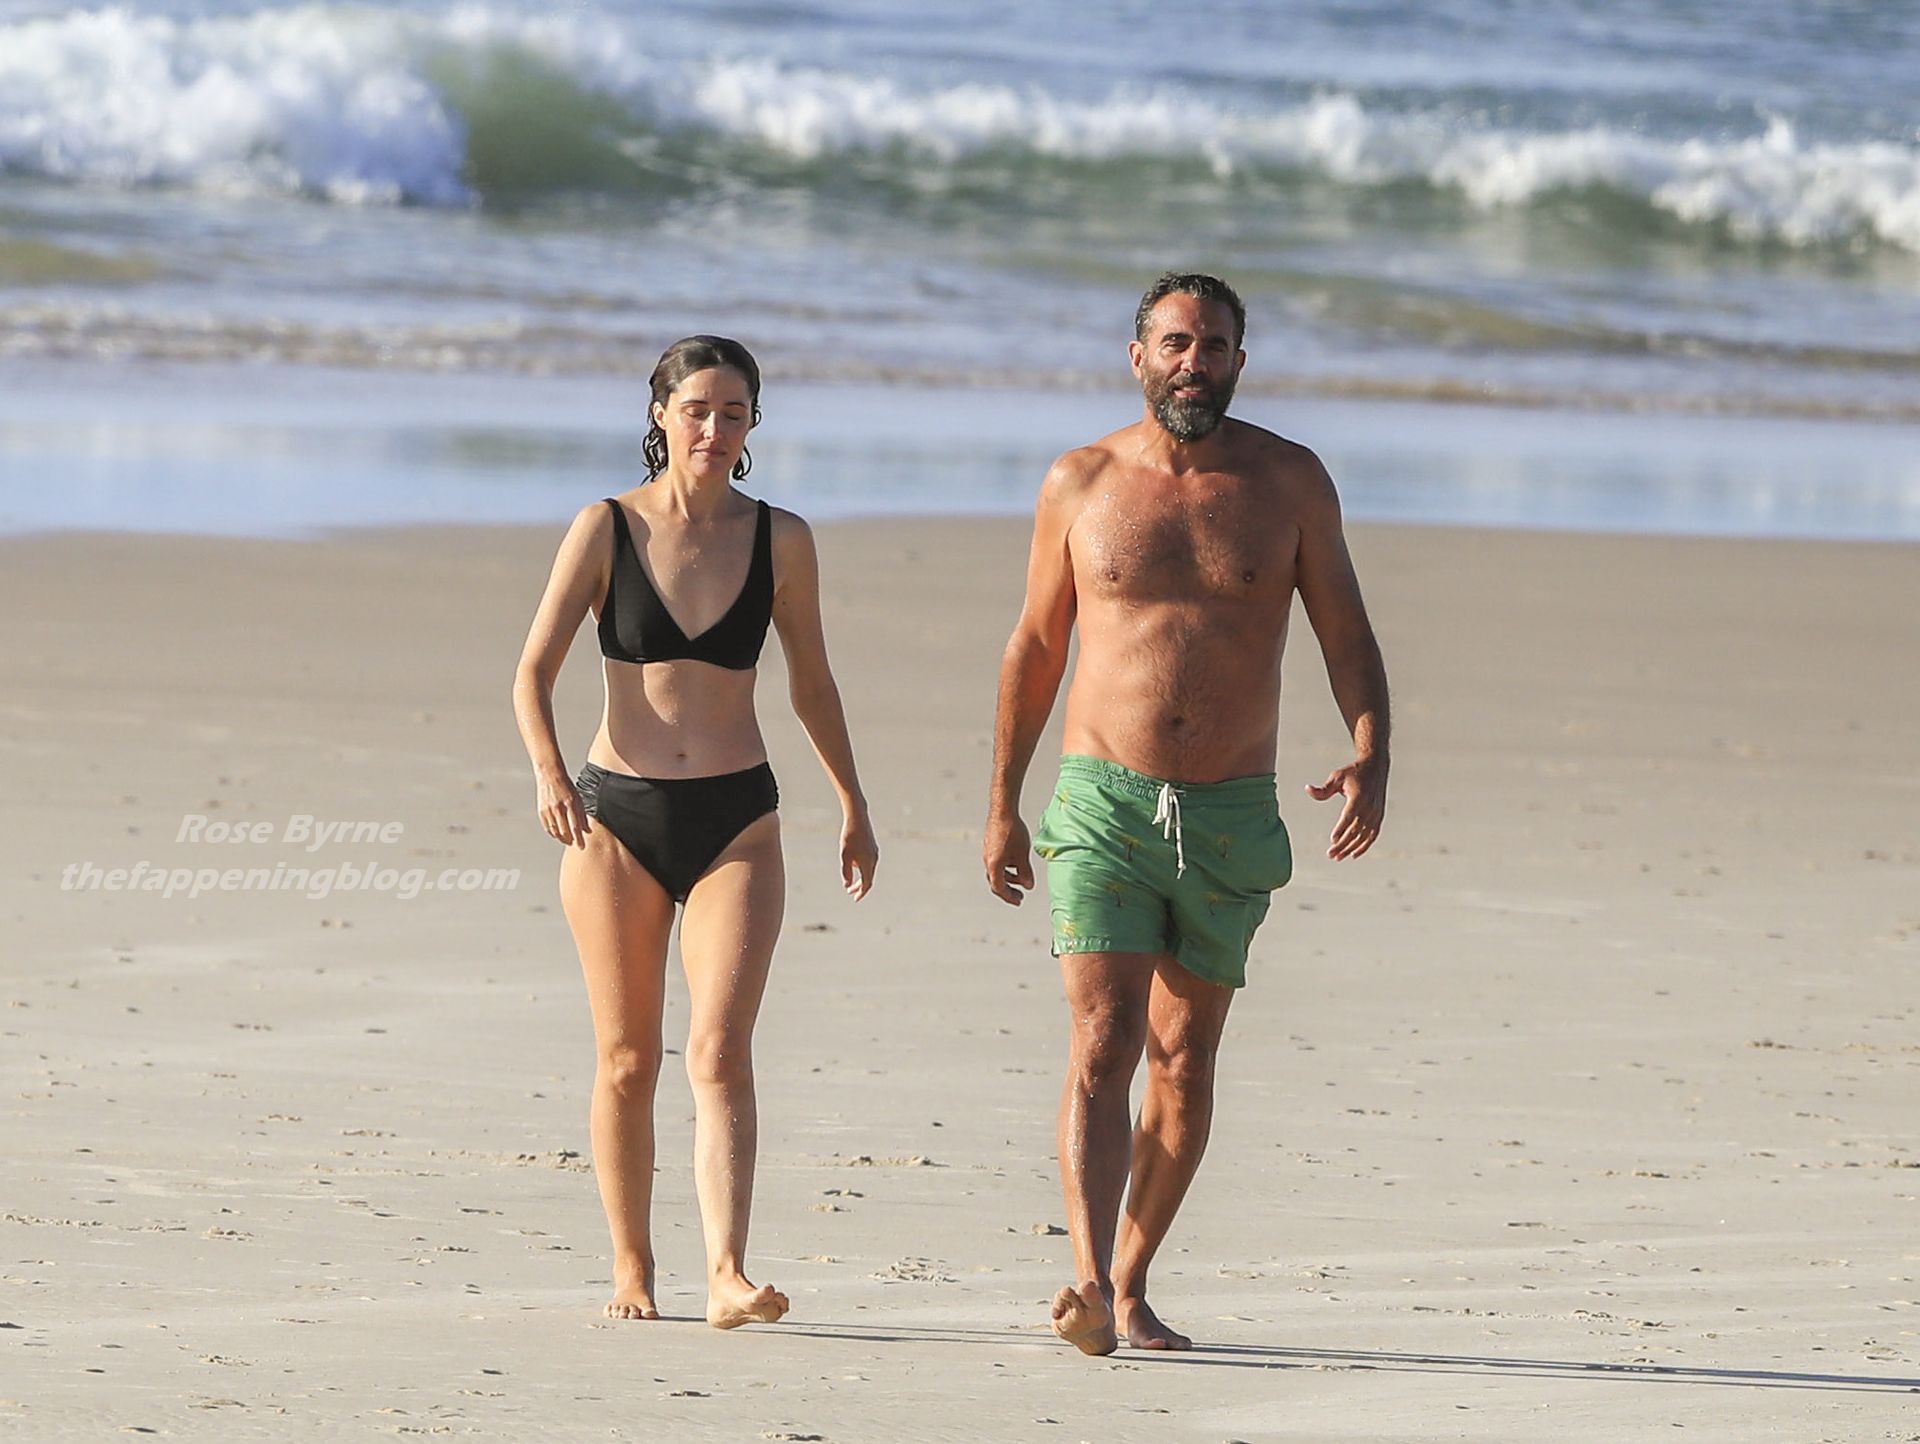 Rose Byrne & Bobby Cannavale Head Out for a Romantic Early Evening Swim (30 Photos)